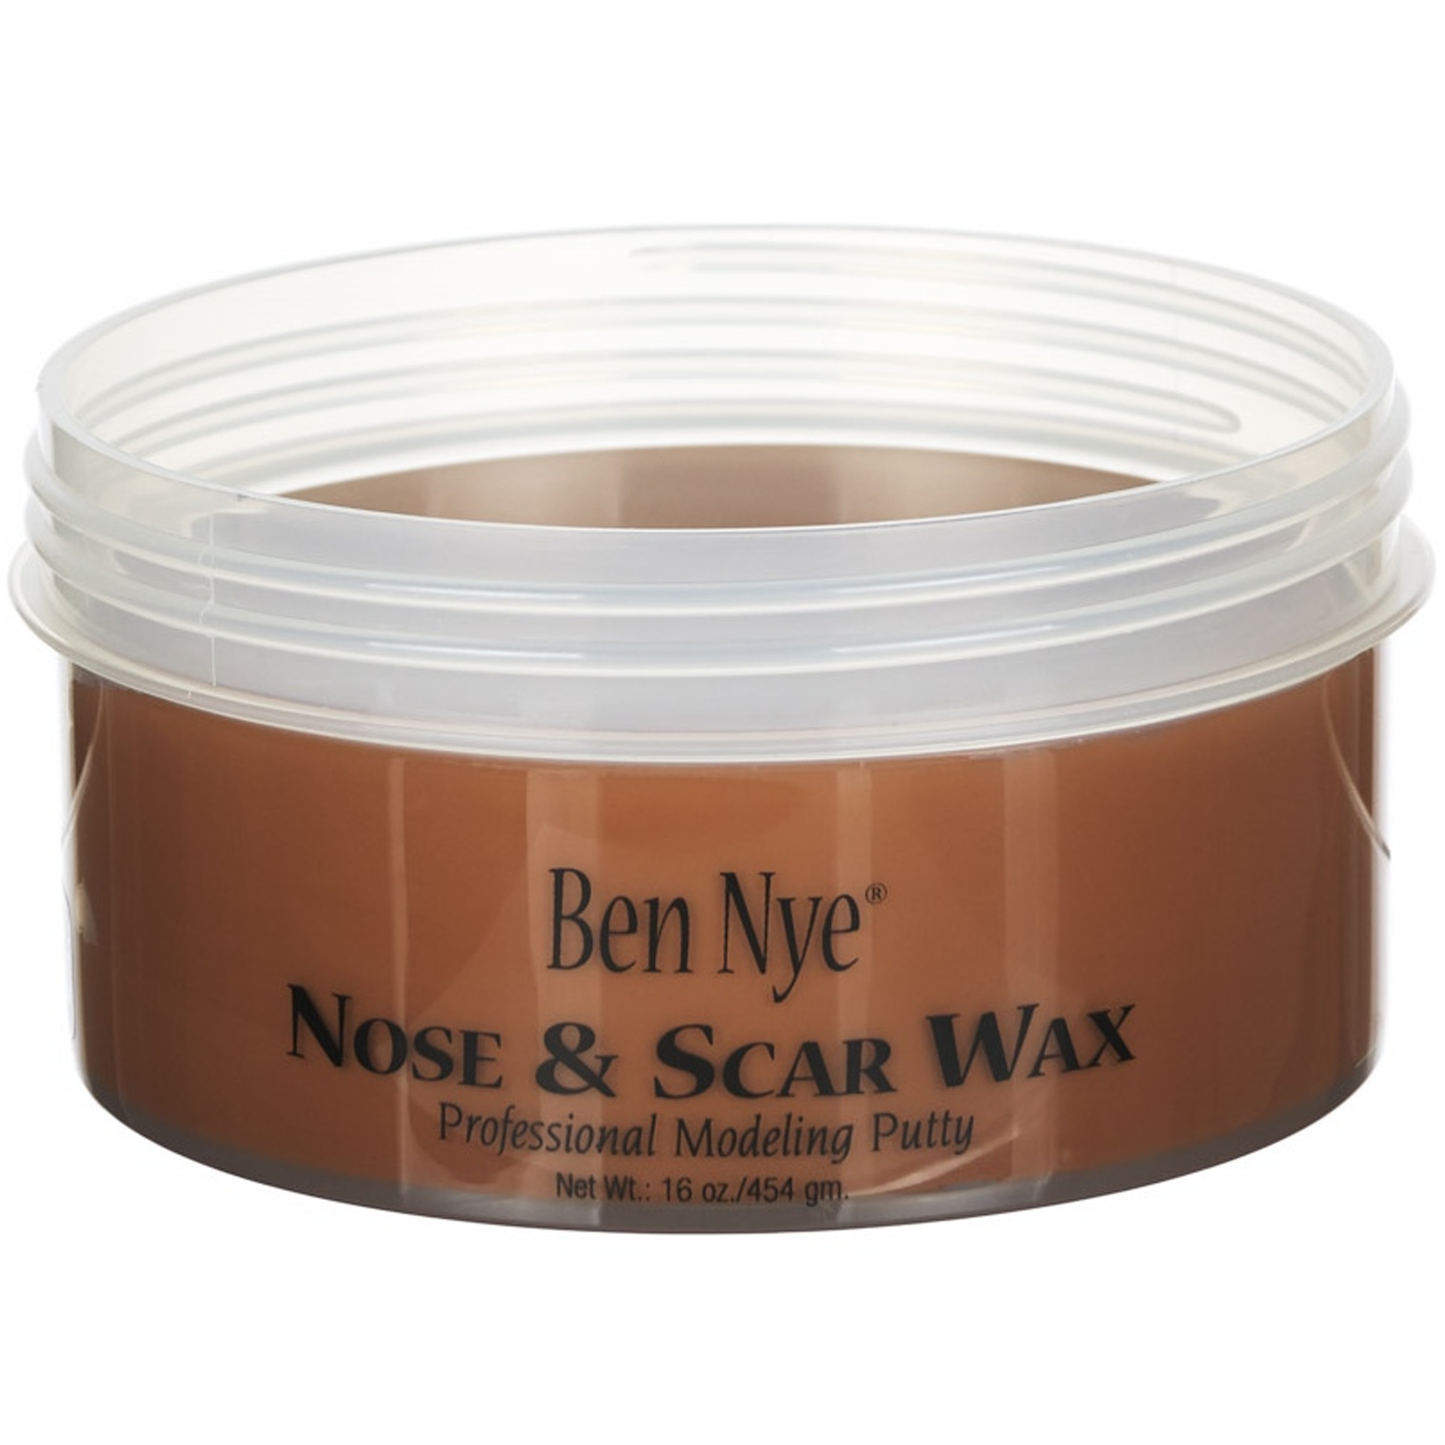 Nose and Scar Wax